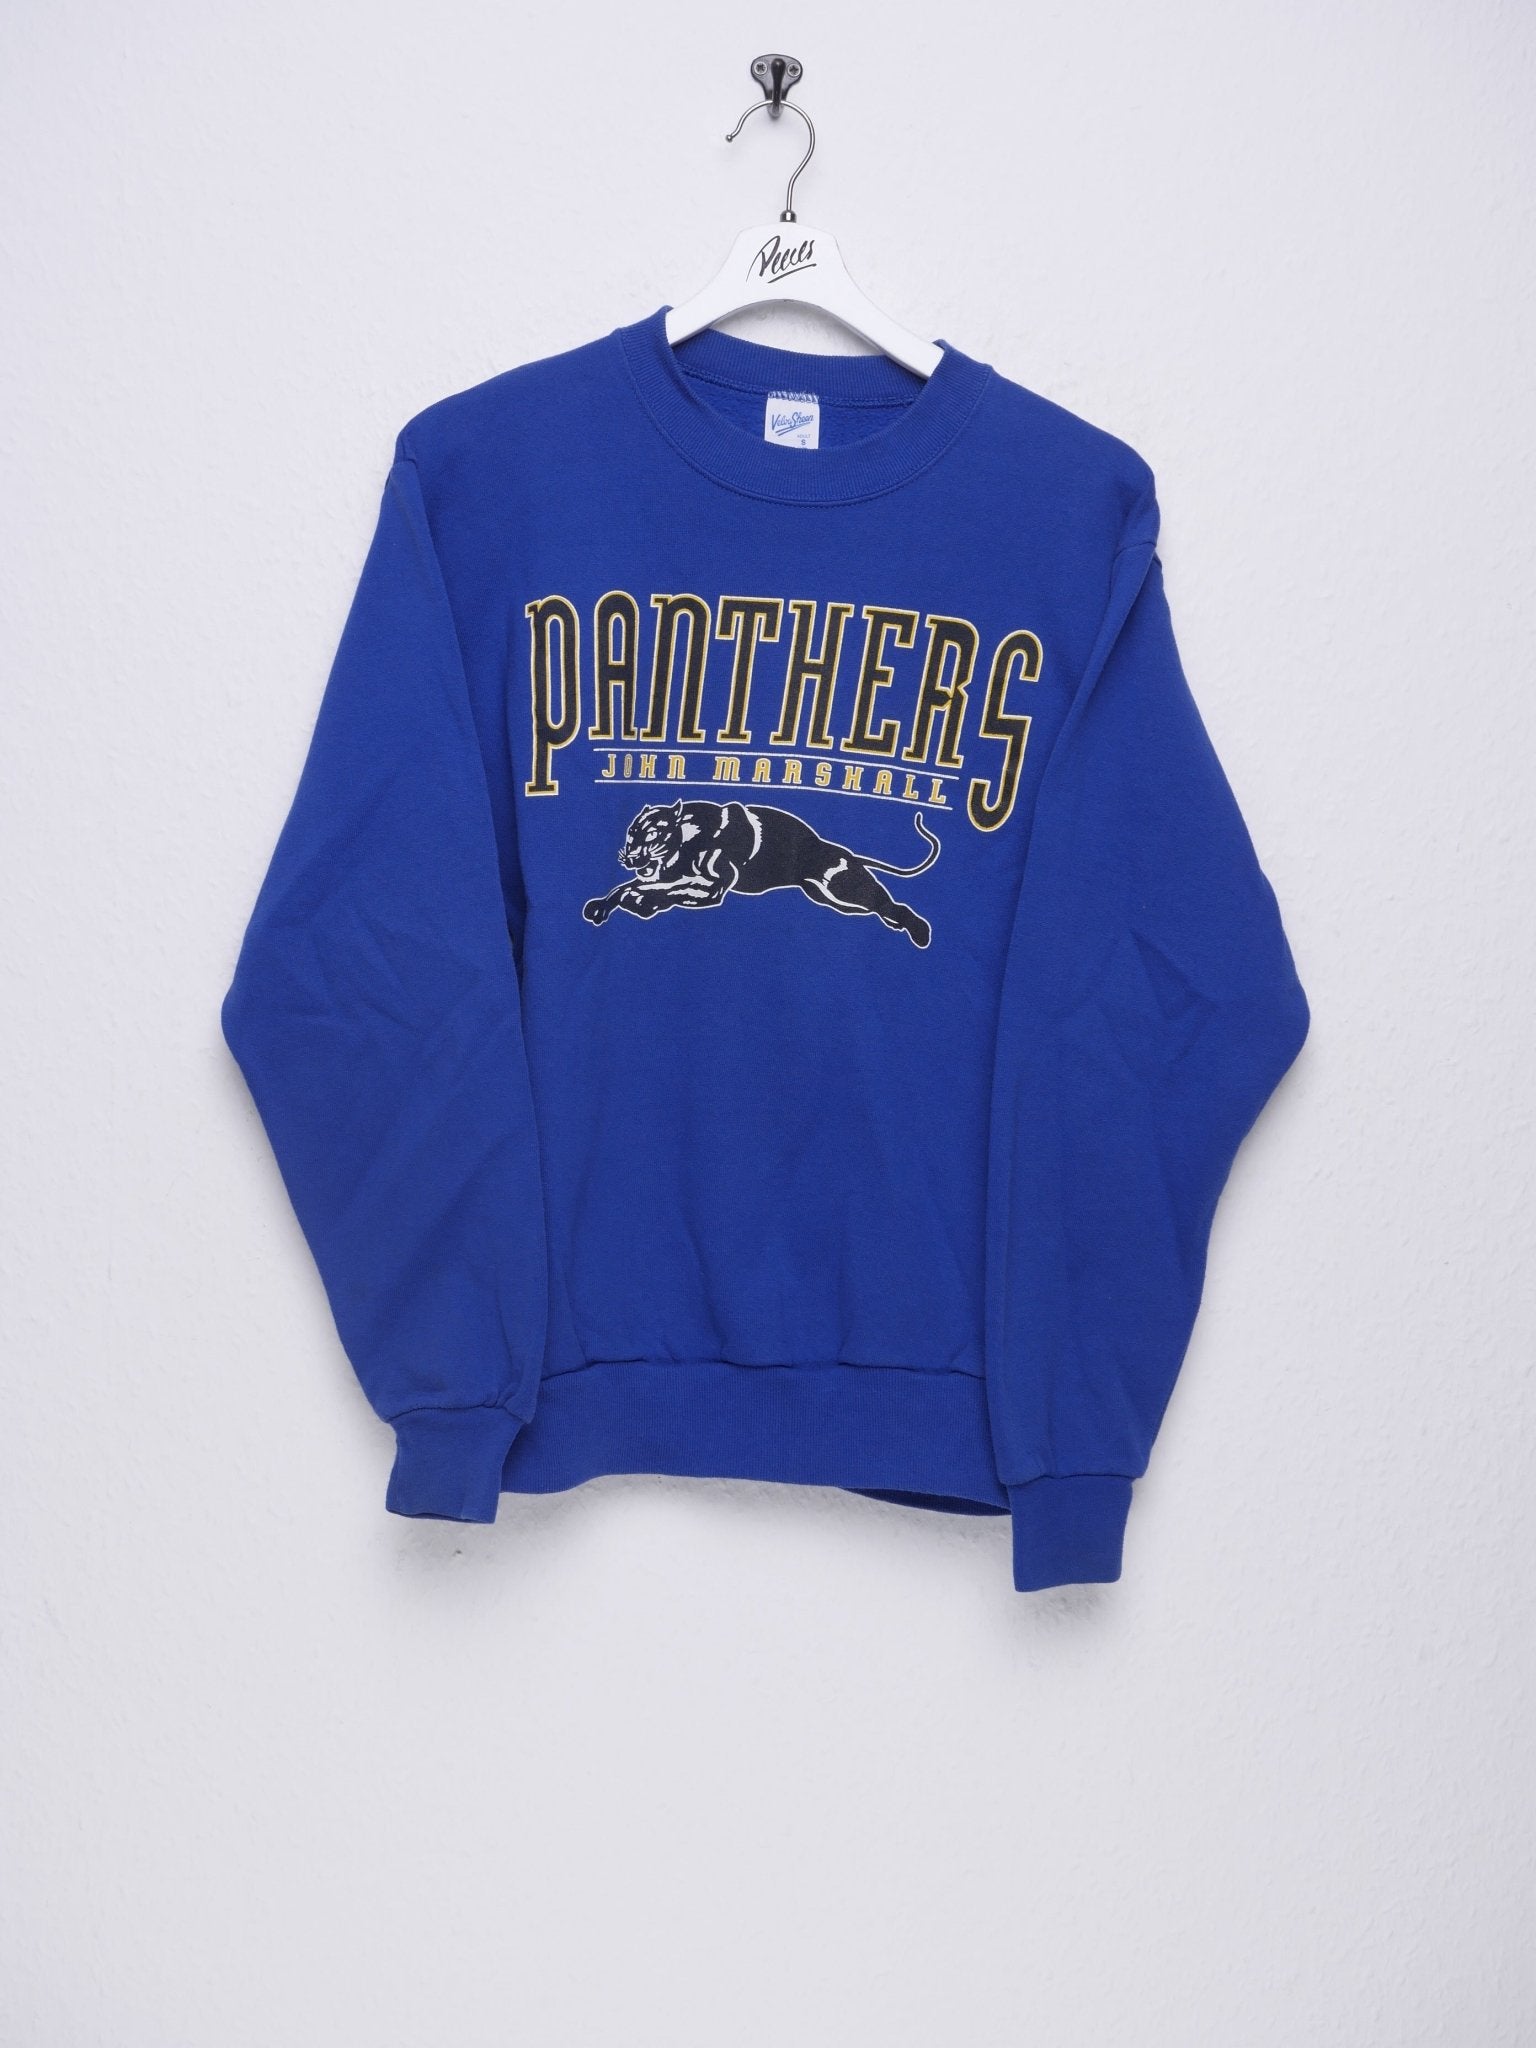 printed Panthers NFL Logo blue Sweater - Peeces